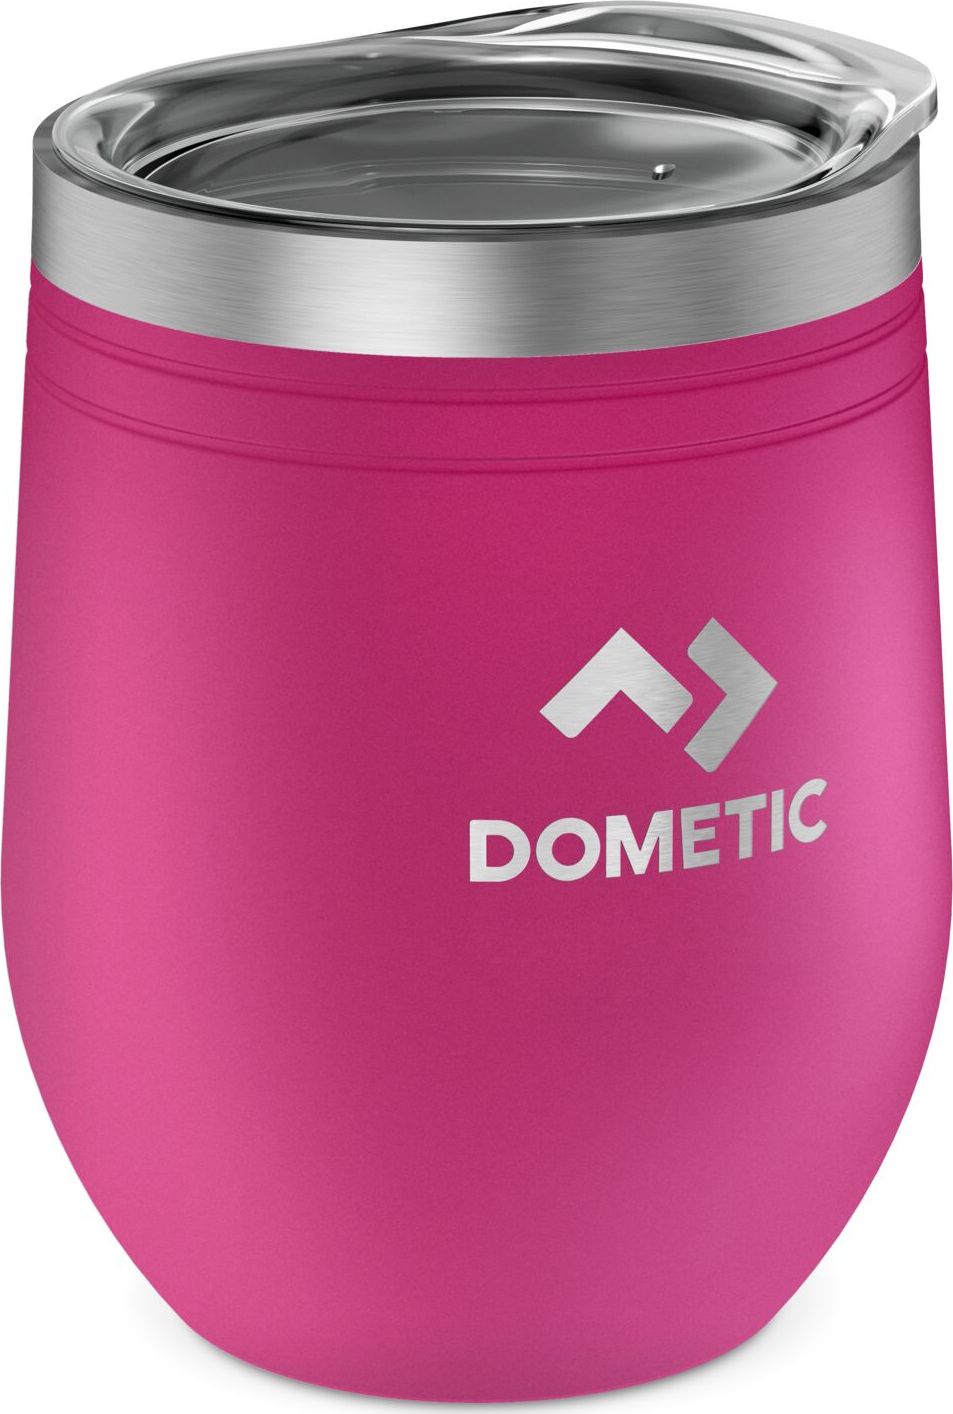 Dometic THWT 30 Orchid